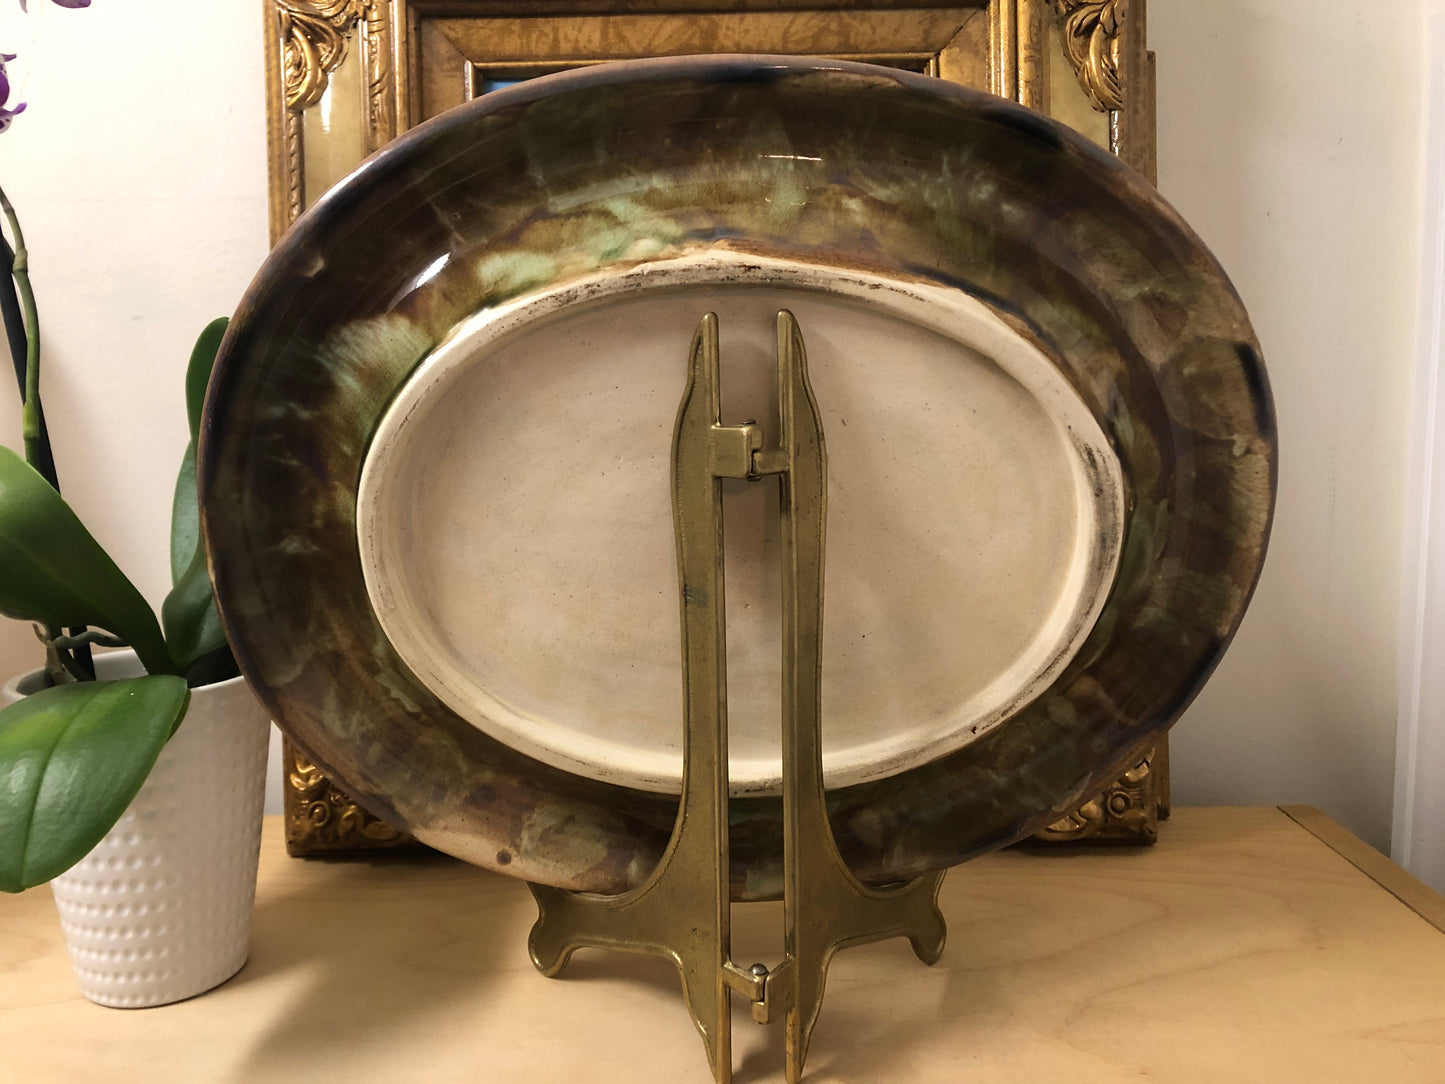 Stunning Antique late 1800s Majolica Oval Platter